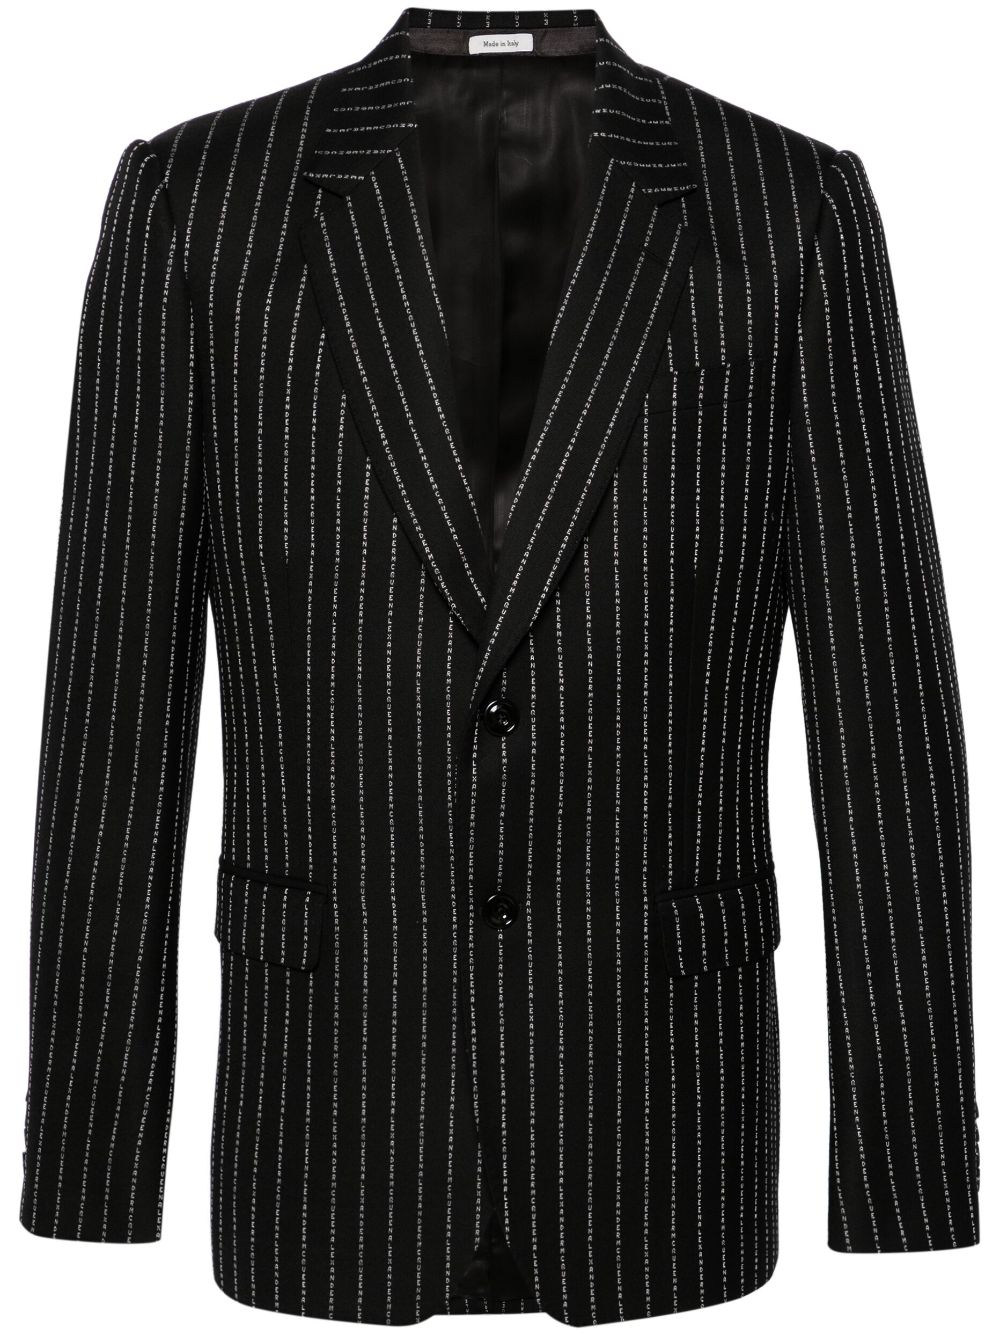 Image 1 of Alexander McQueen pinstriped single-breasted blazer